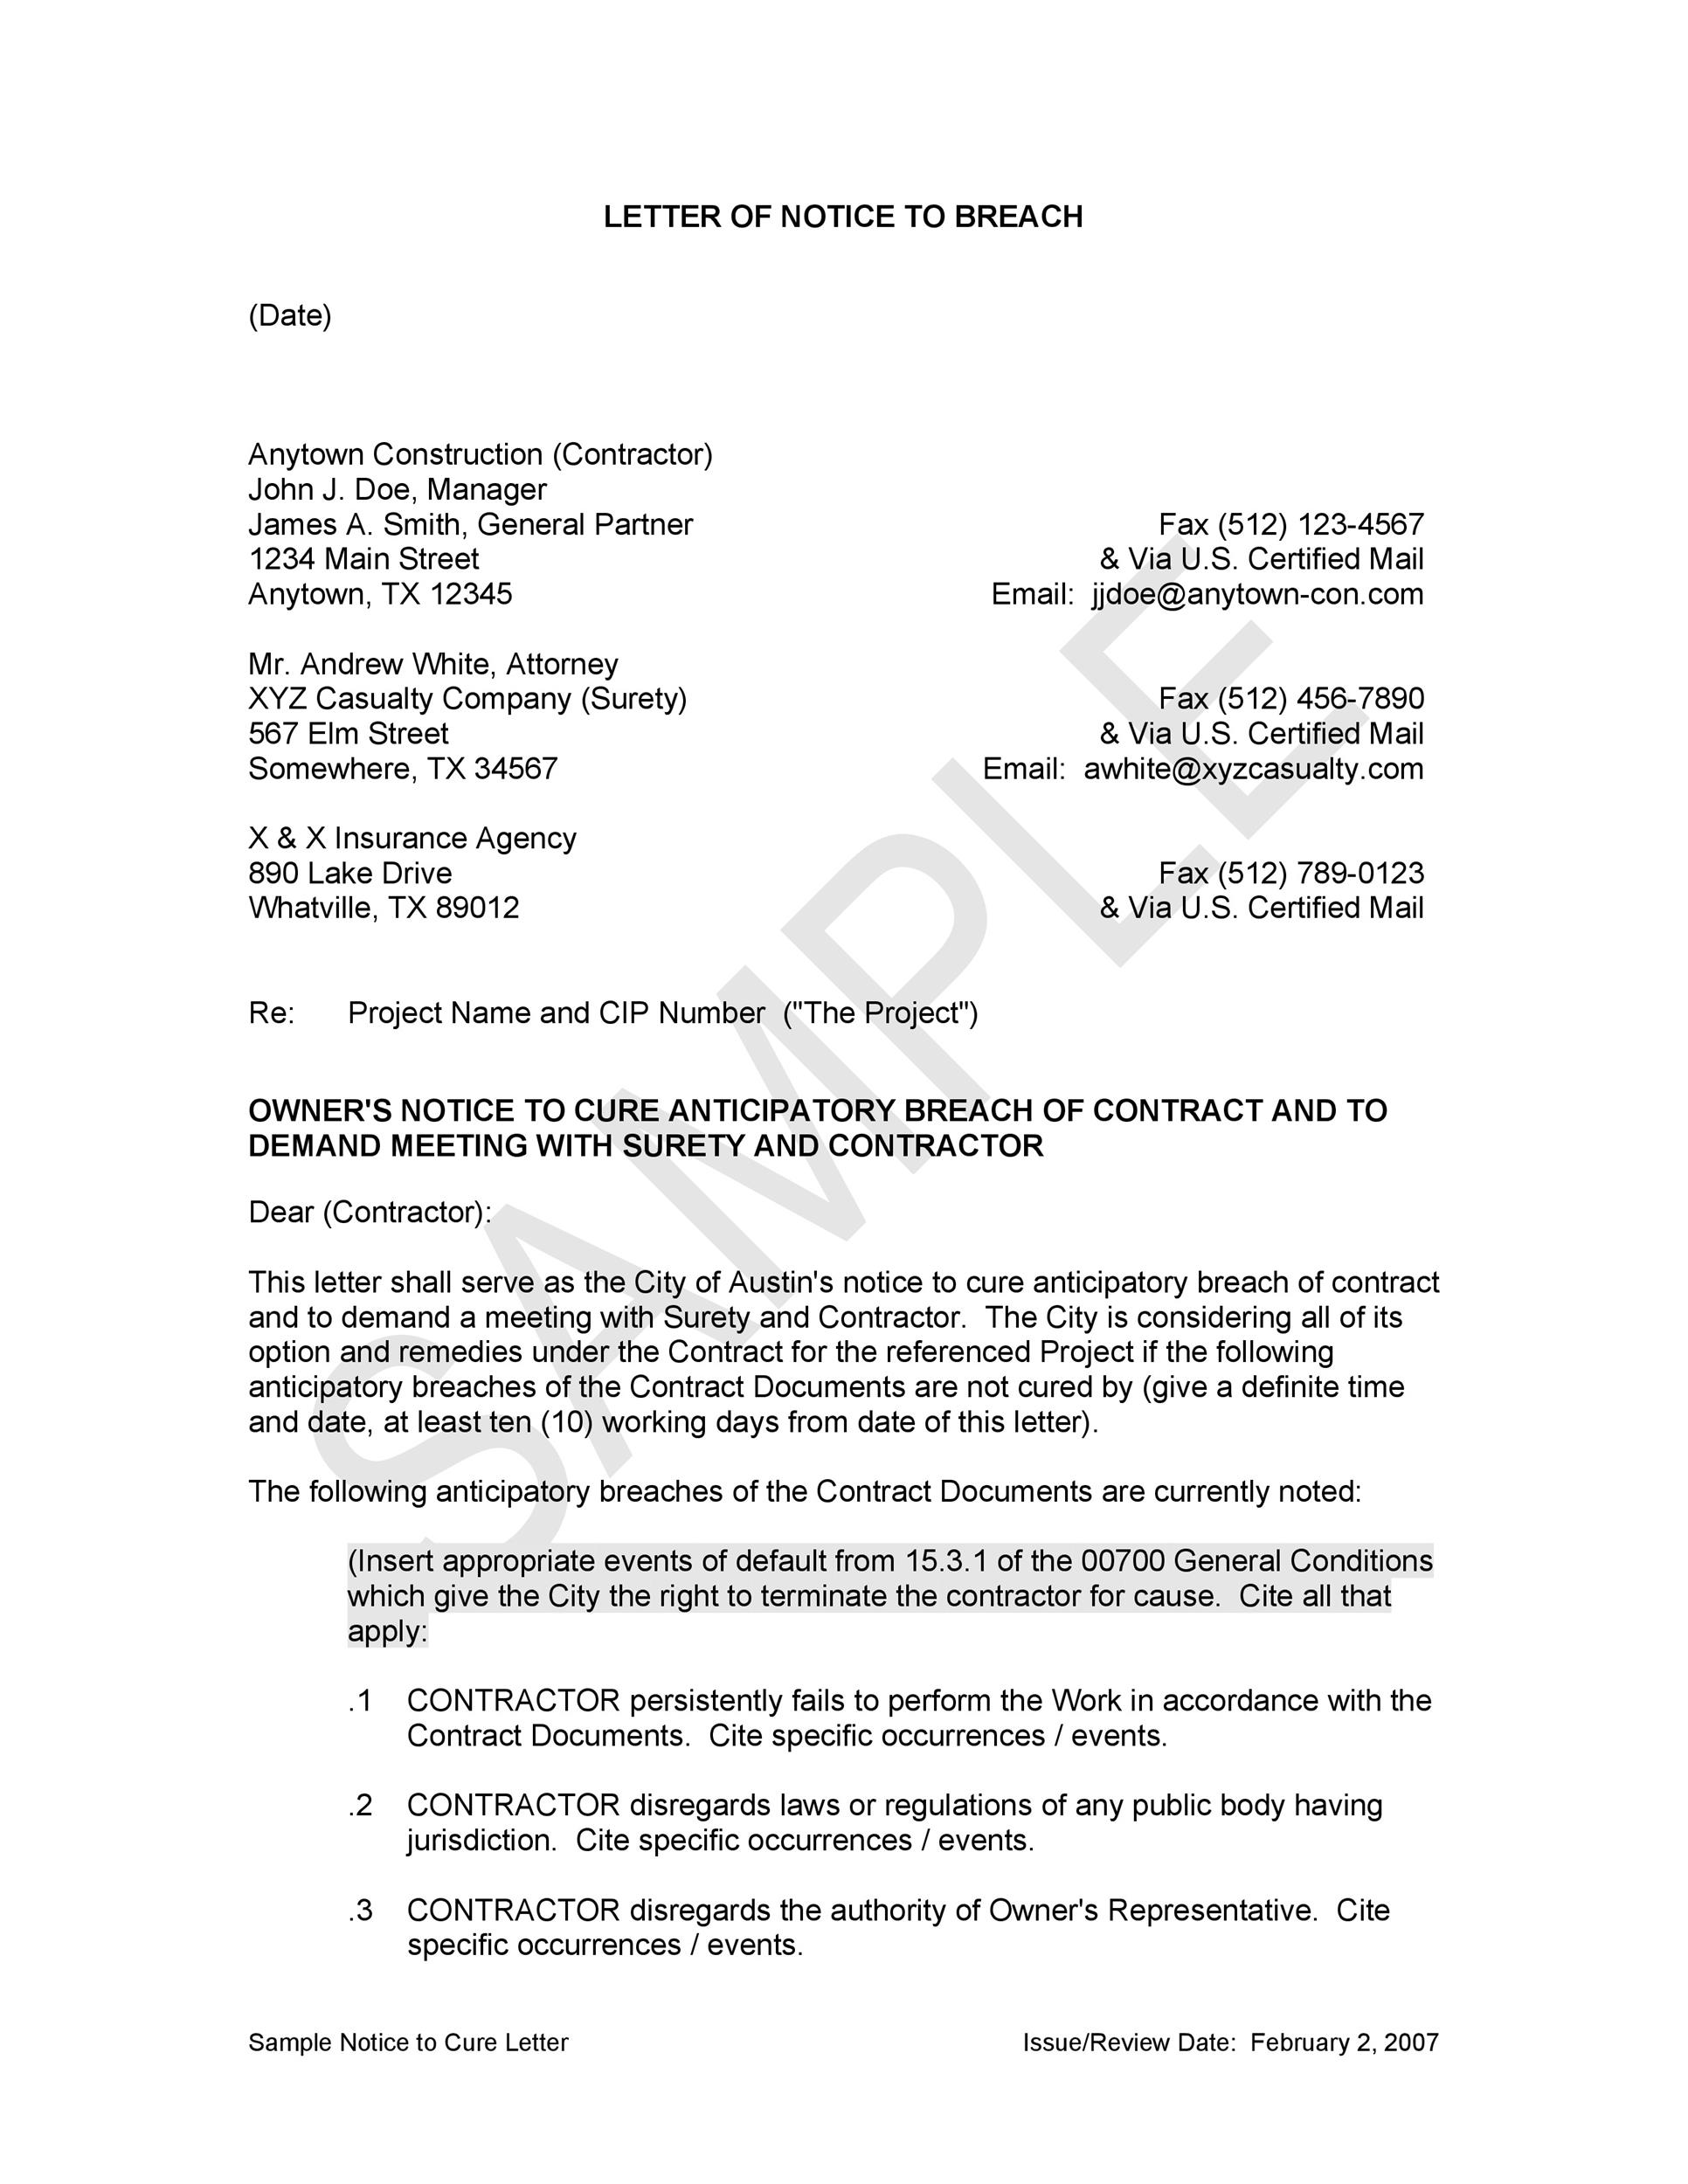 Breach Of Contract Letter Pdf from templatelab.com